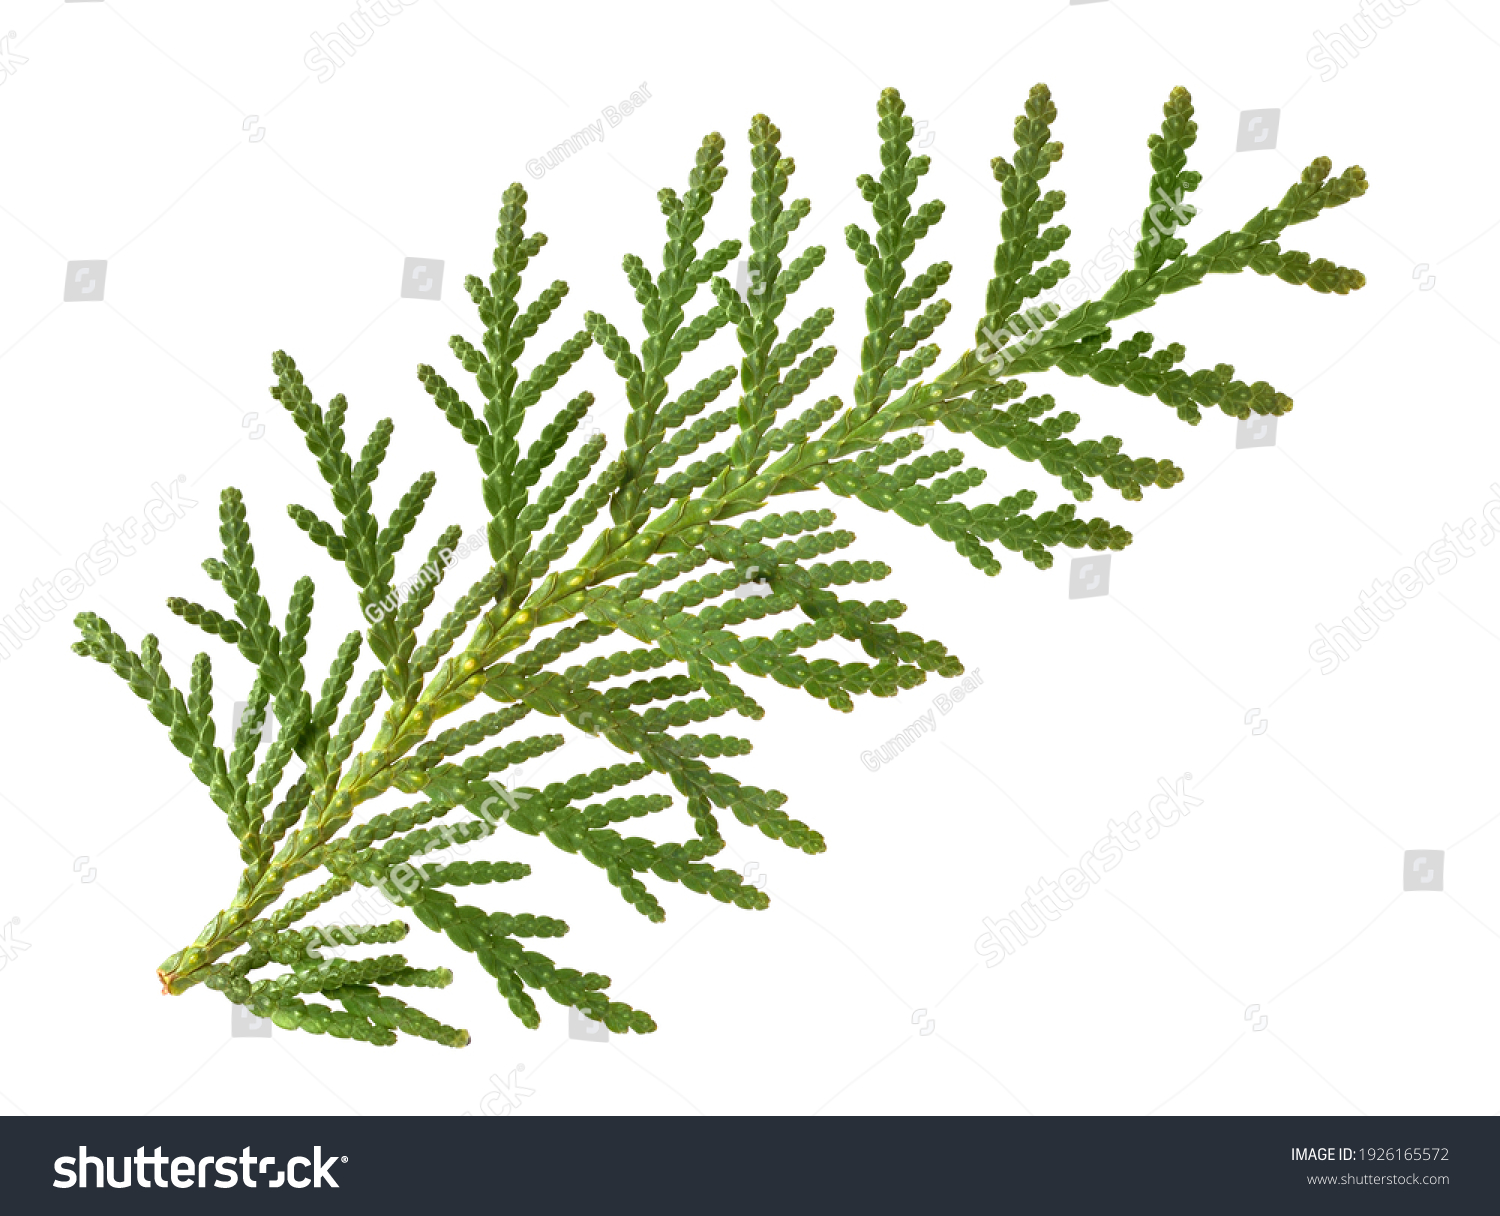 White Cedar Foliage Fragment (Thuja Occidentalis Leaves). Medicinal Plant. Isolated on White. #1926165572